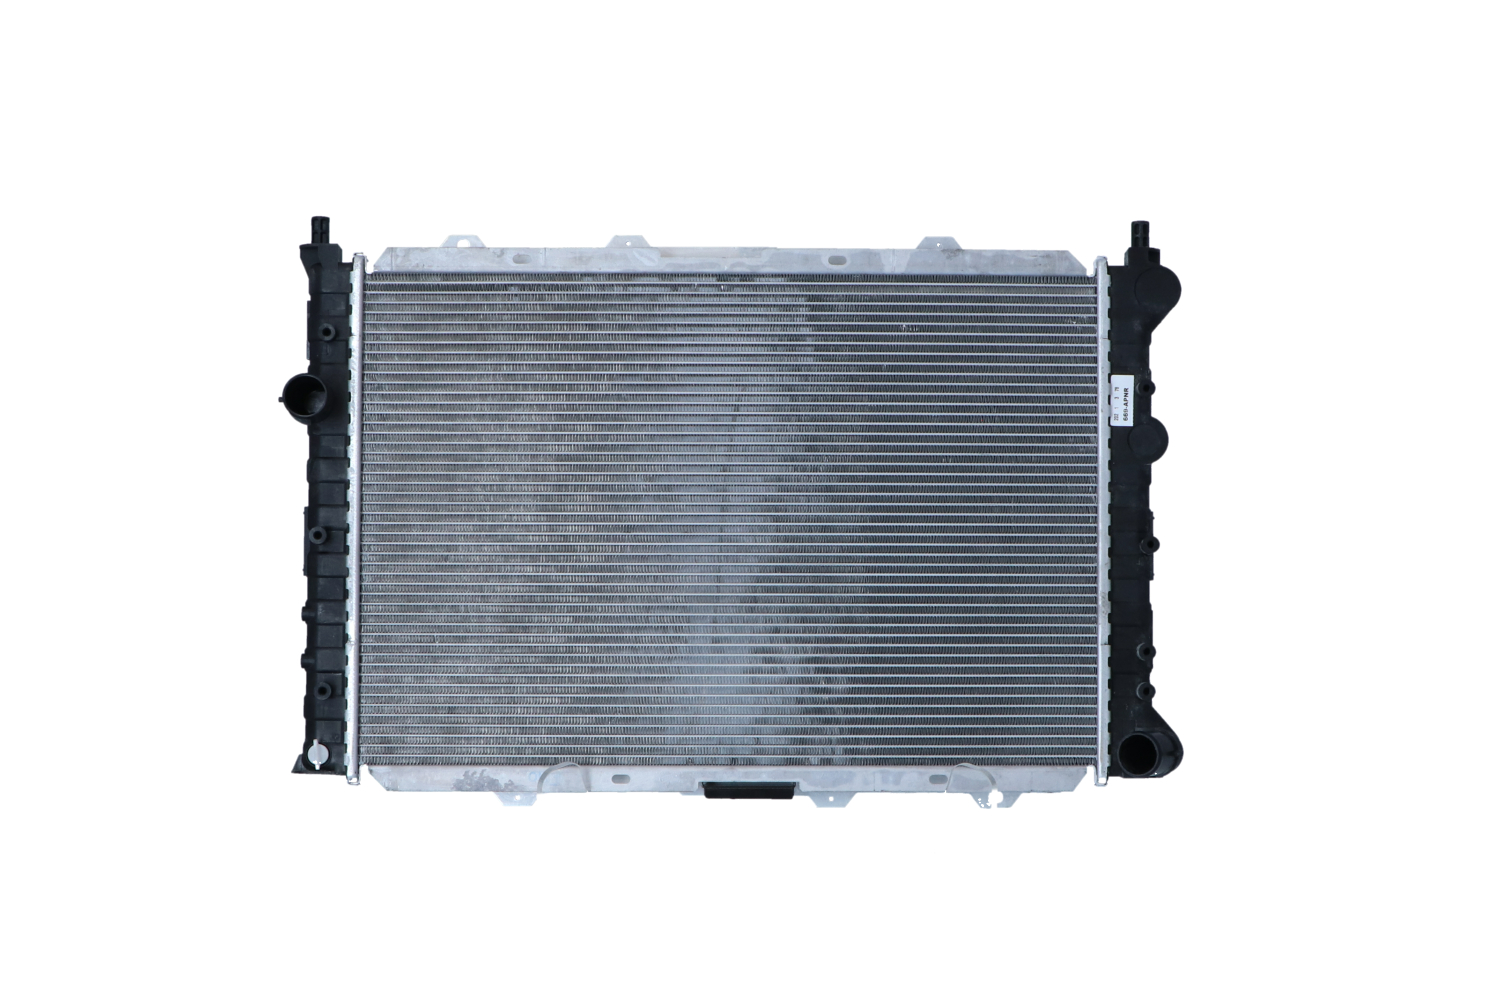 NRF Aluminium, 580 x 387 x 24 mm, with mounting parts, Brazed cooling fins Radiator 58202 buy